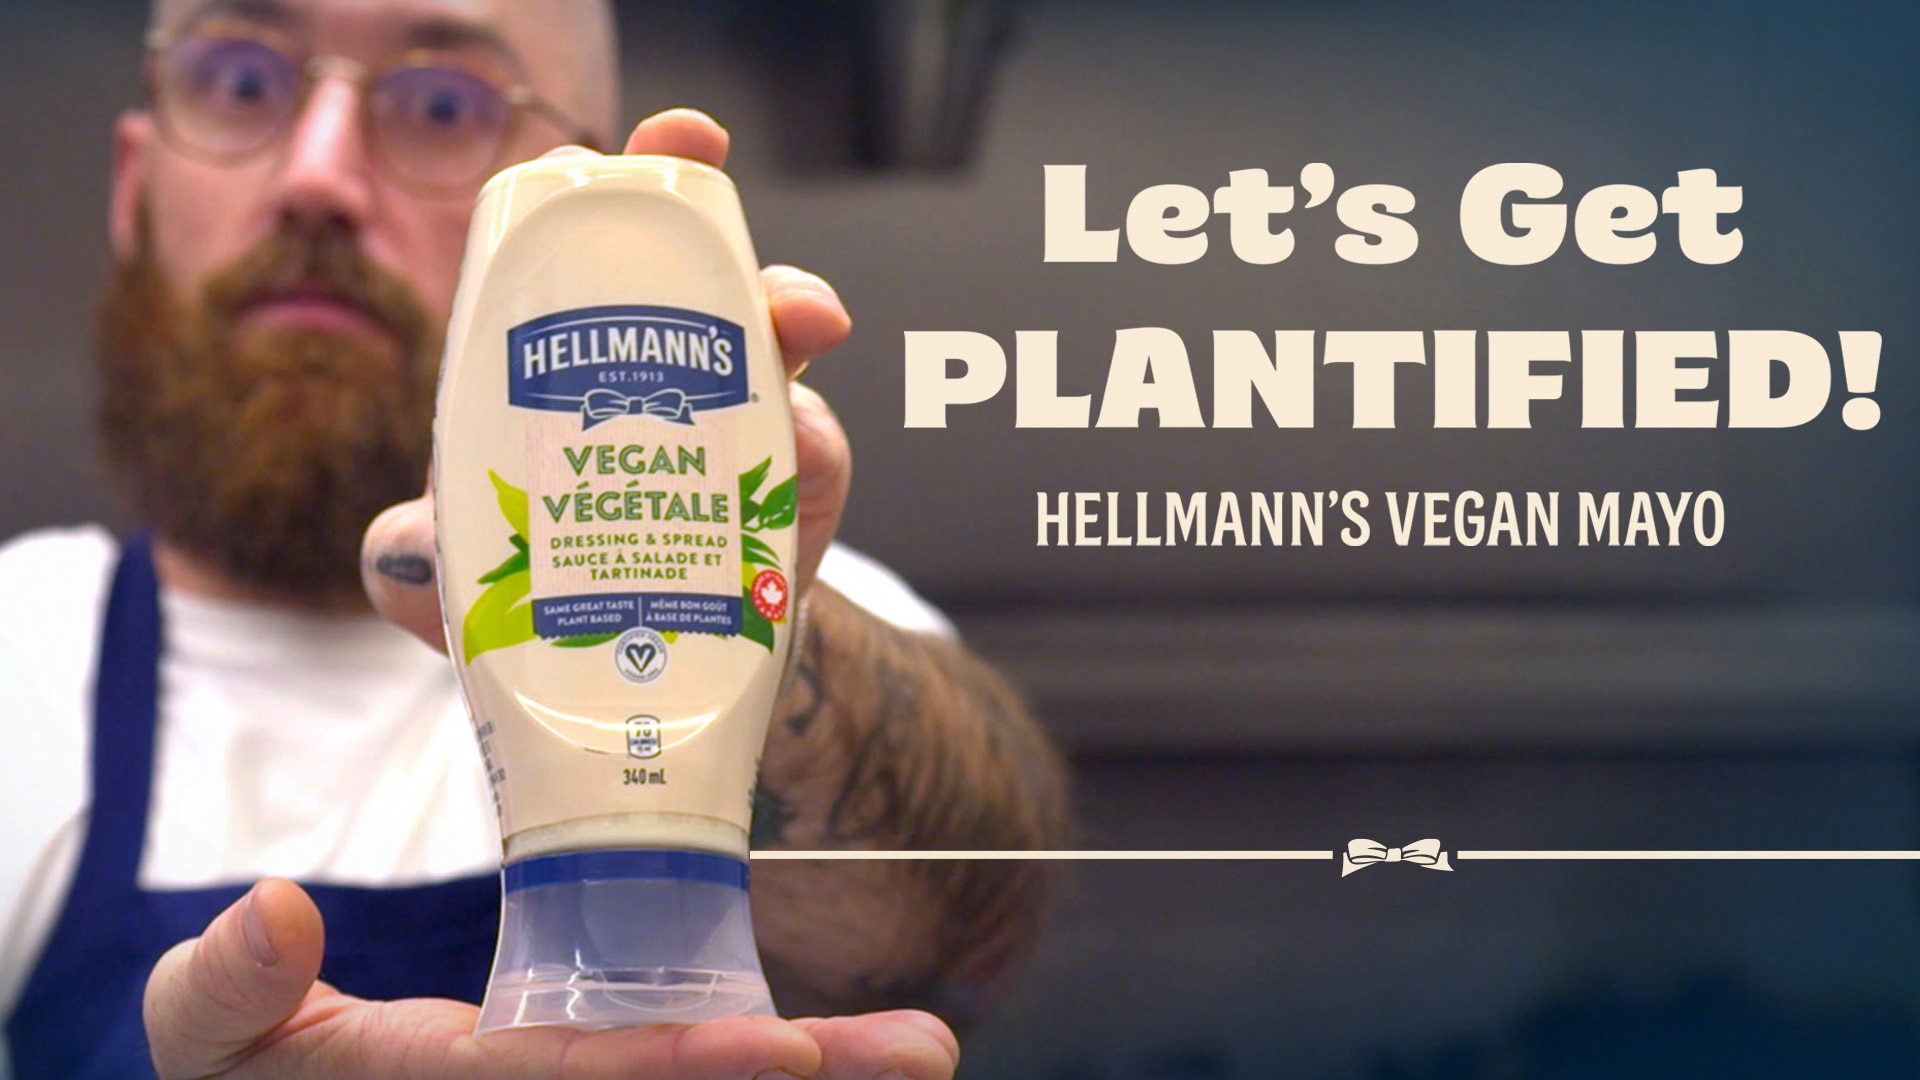 An image of a chef presenting the Hellmann's Vegan 340mL product in their hands alongside the text: “Let's Get PLANTIFIED! Hellmann's Vegan Mayo